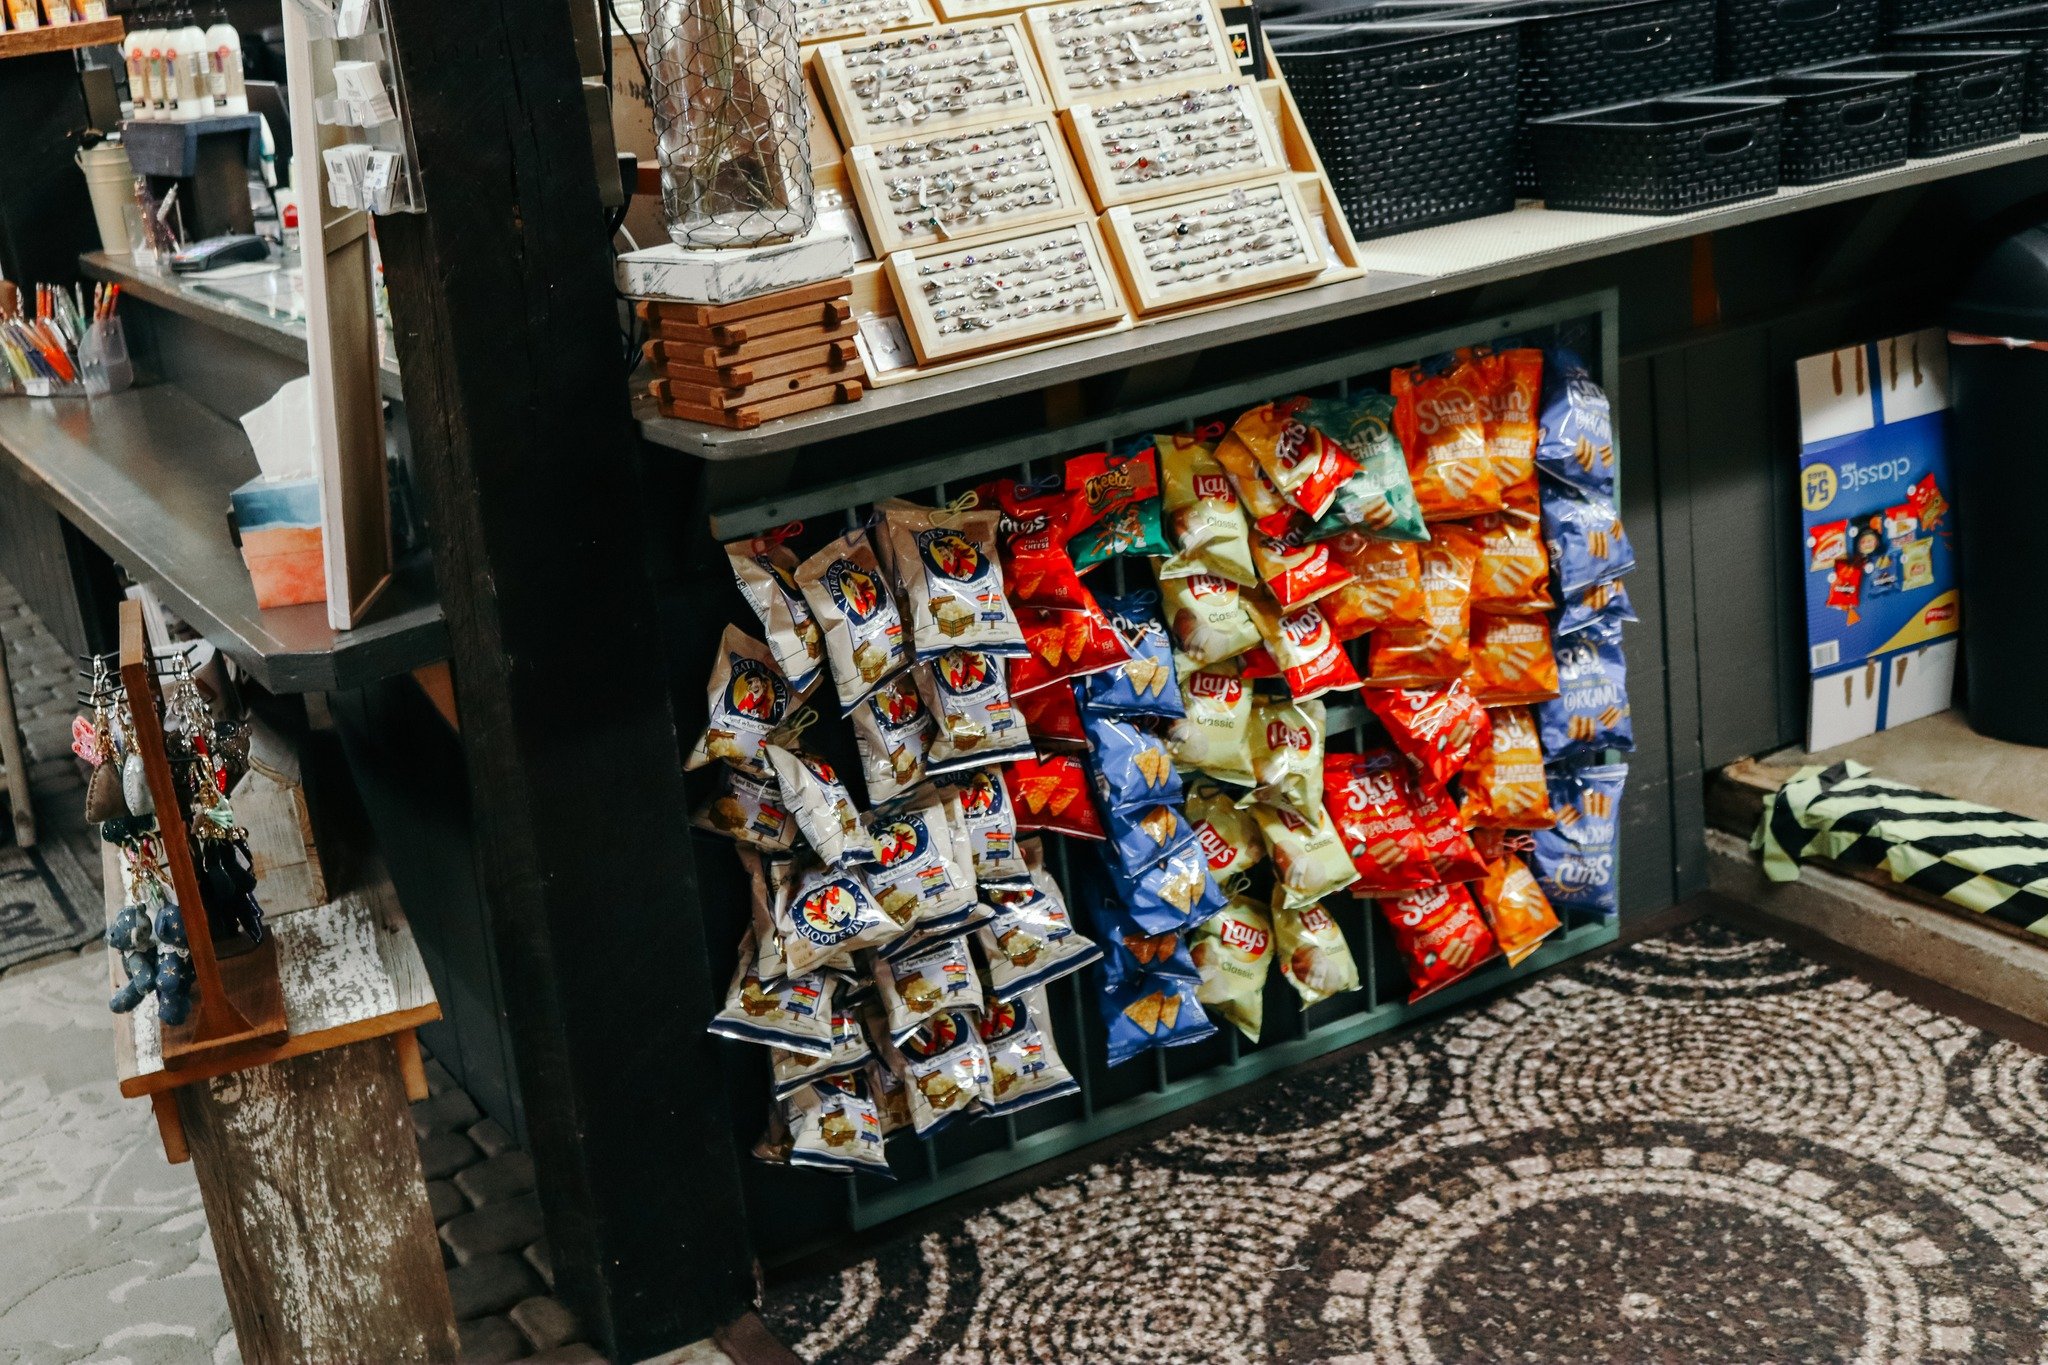 GRAB A SNACK OR A SODA!

We have chips, puffs, sweet treats, and refreshments available for purchase near our main counter! Don't let hanger ruin your trip to our barn - grab a little something to enjoy.

www.prestigecreativemarkets.com | 630-326-885